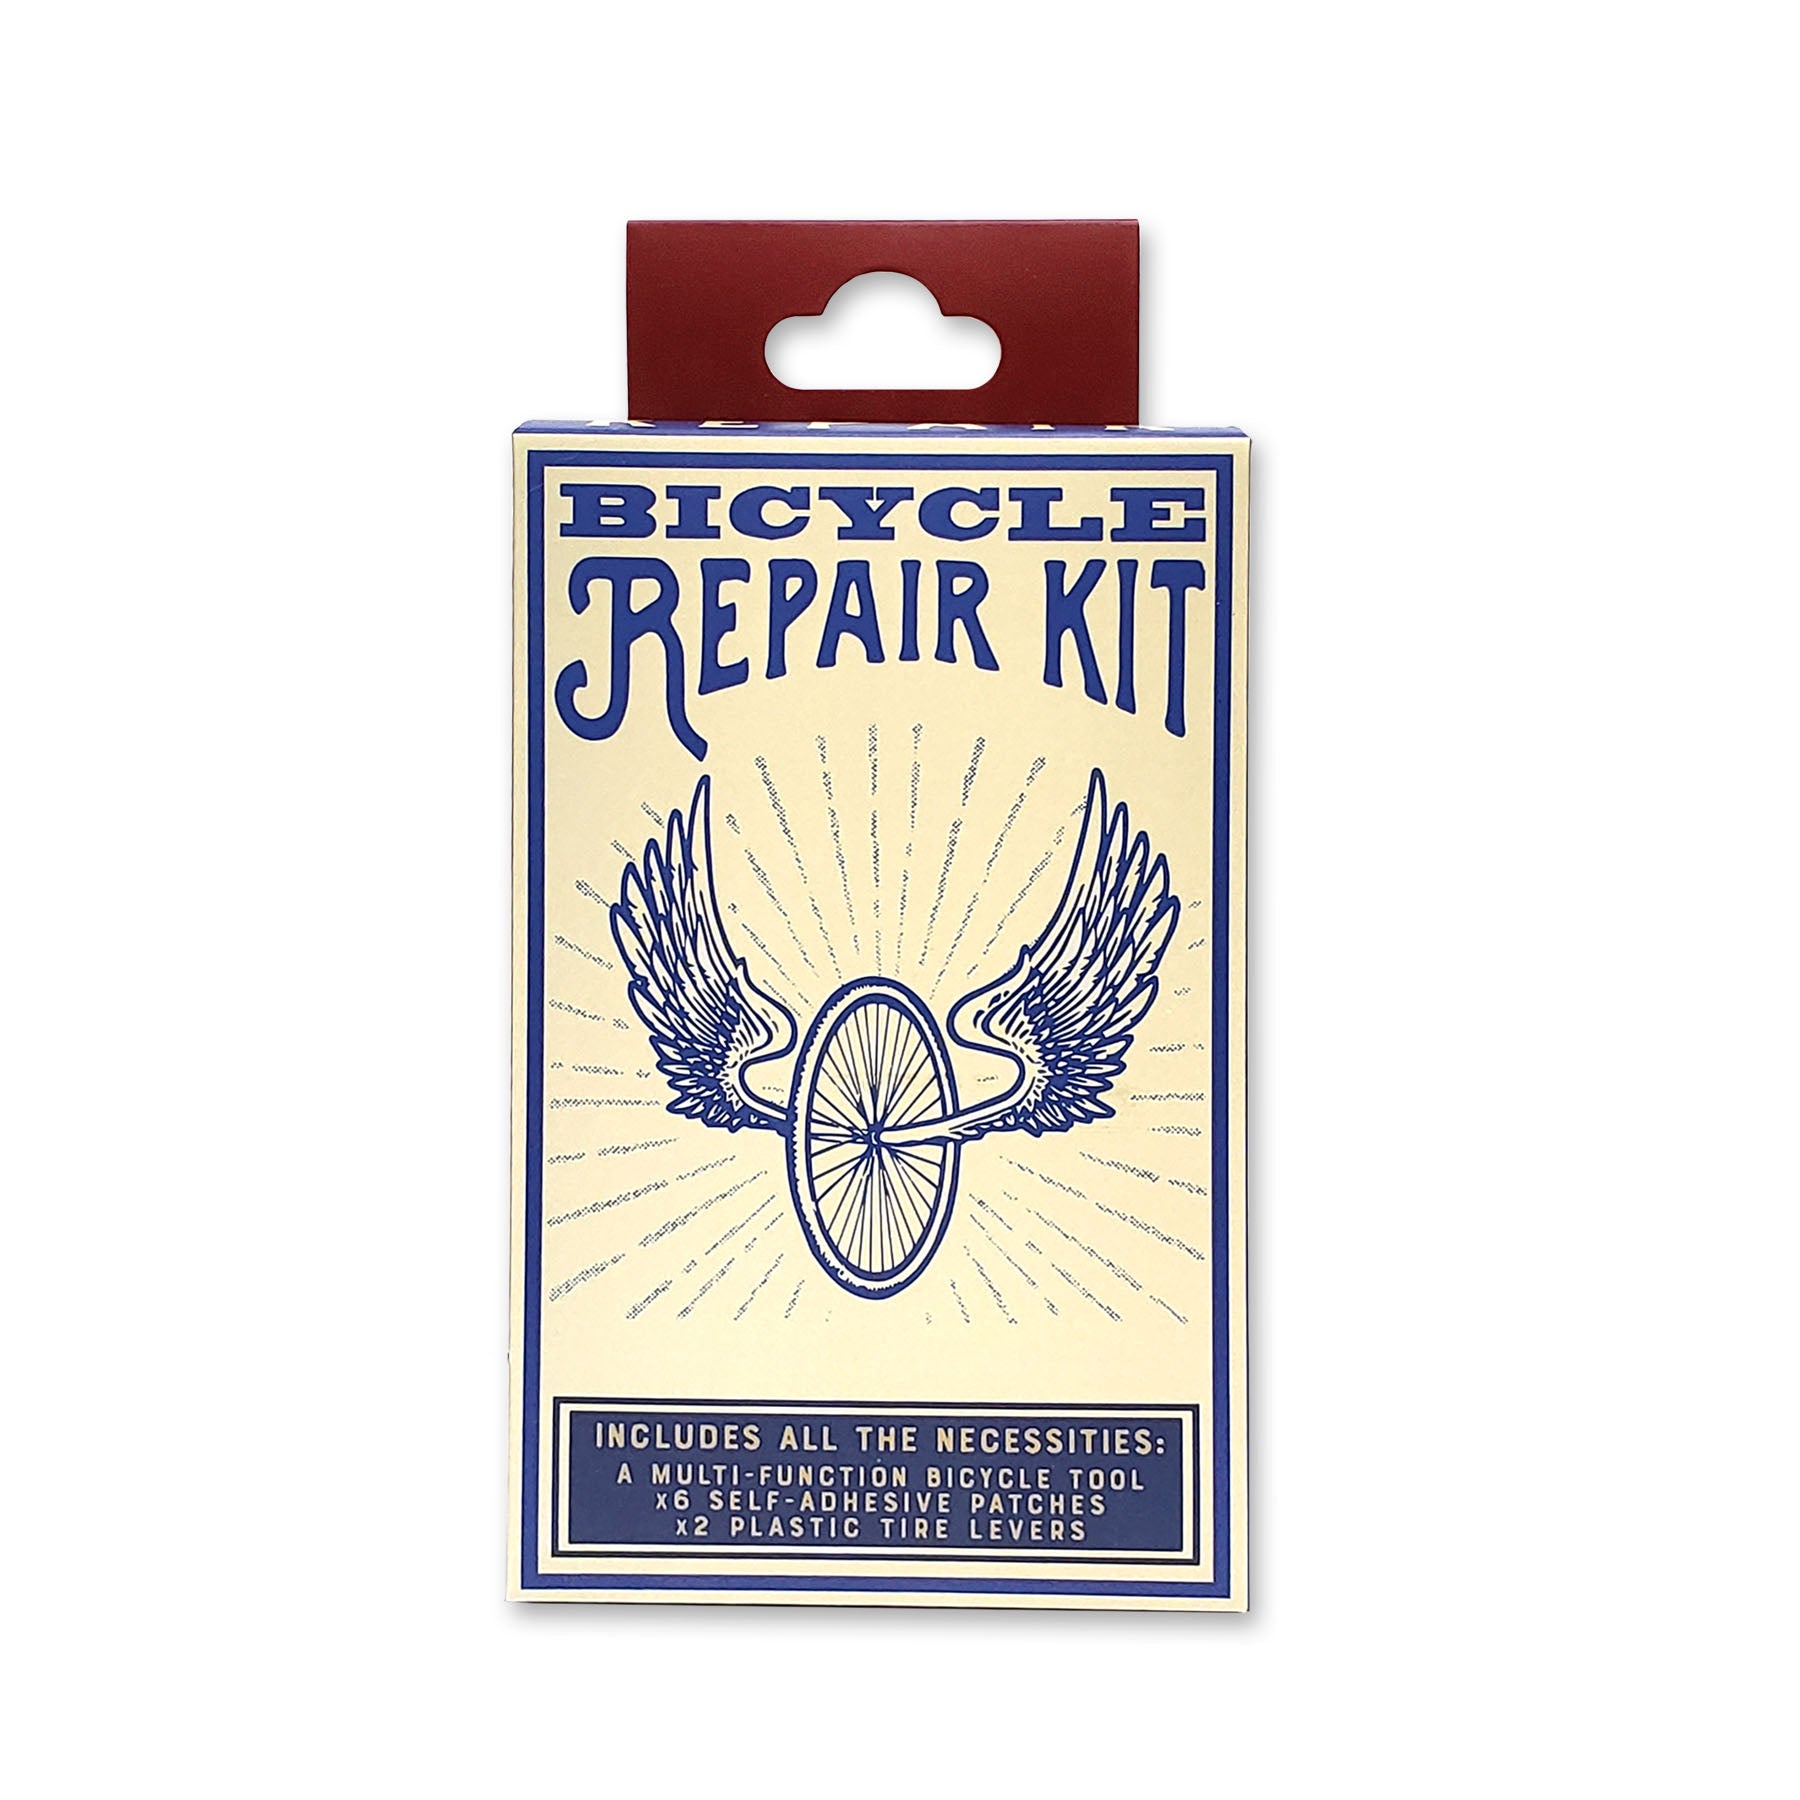 Box for Bicycle Repair Kit Multifunction Utility Tool Whether outdoors mountain biking, or coasting across the city on your fixie, this bike repair kit is a cyclists must-have.